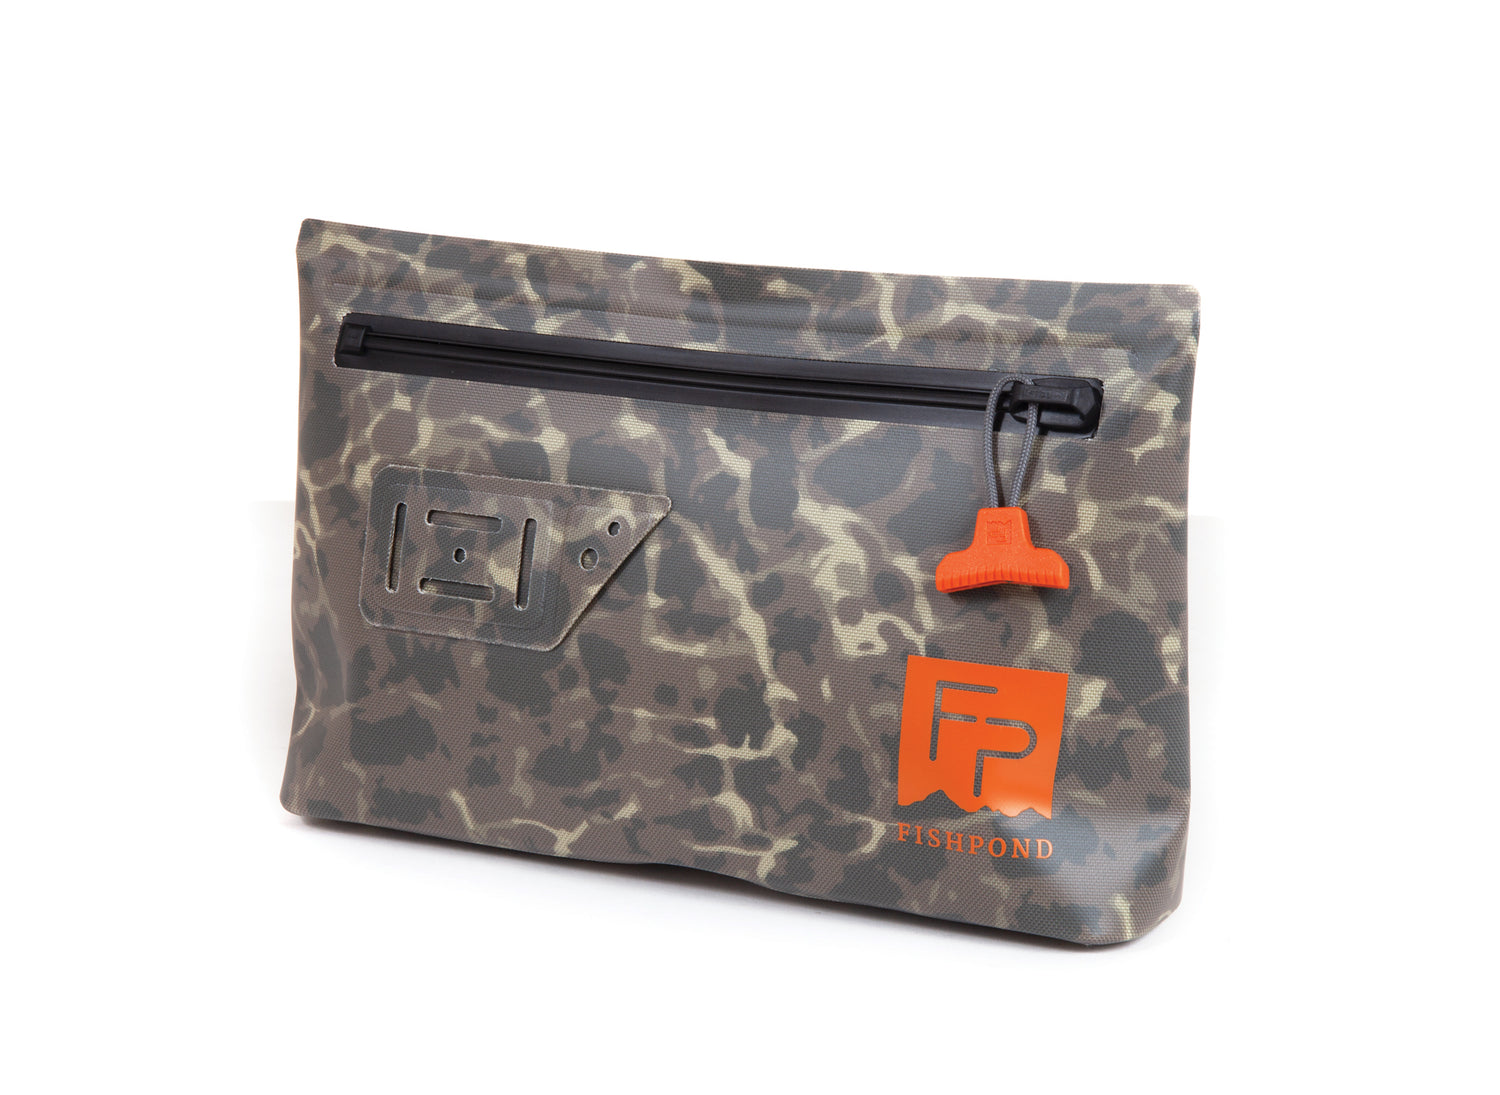 Thunderhead Submersible Pouch – Fishpond